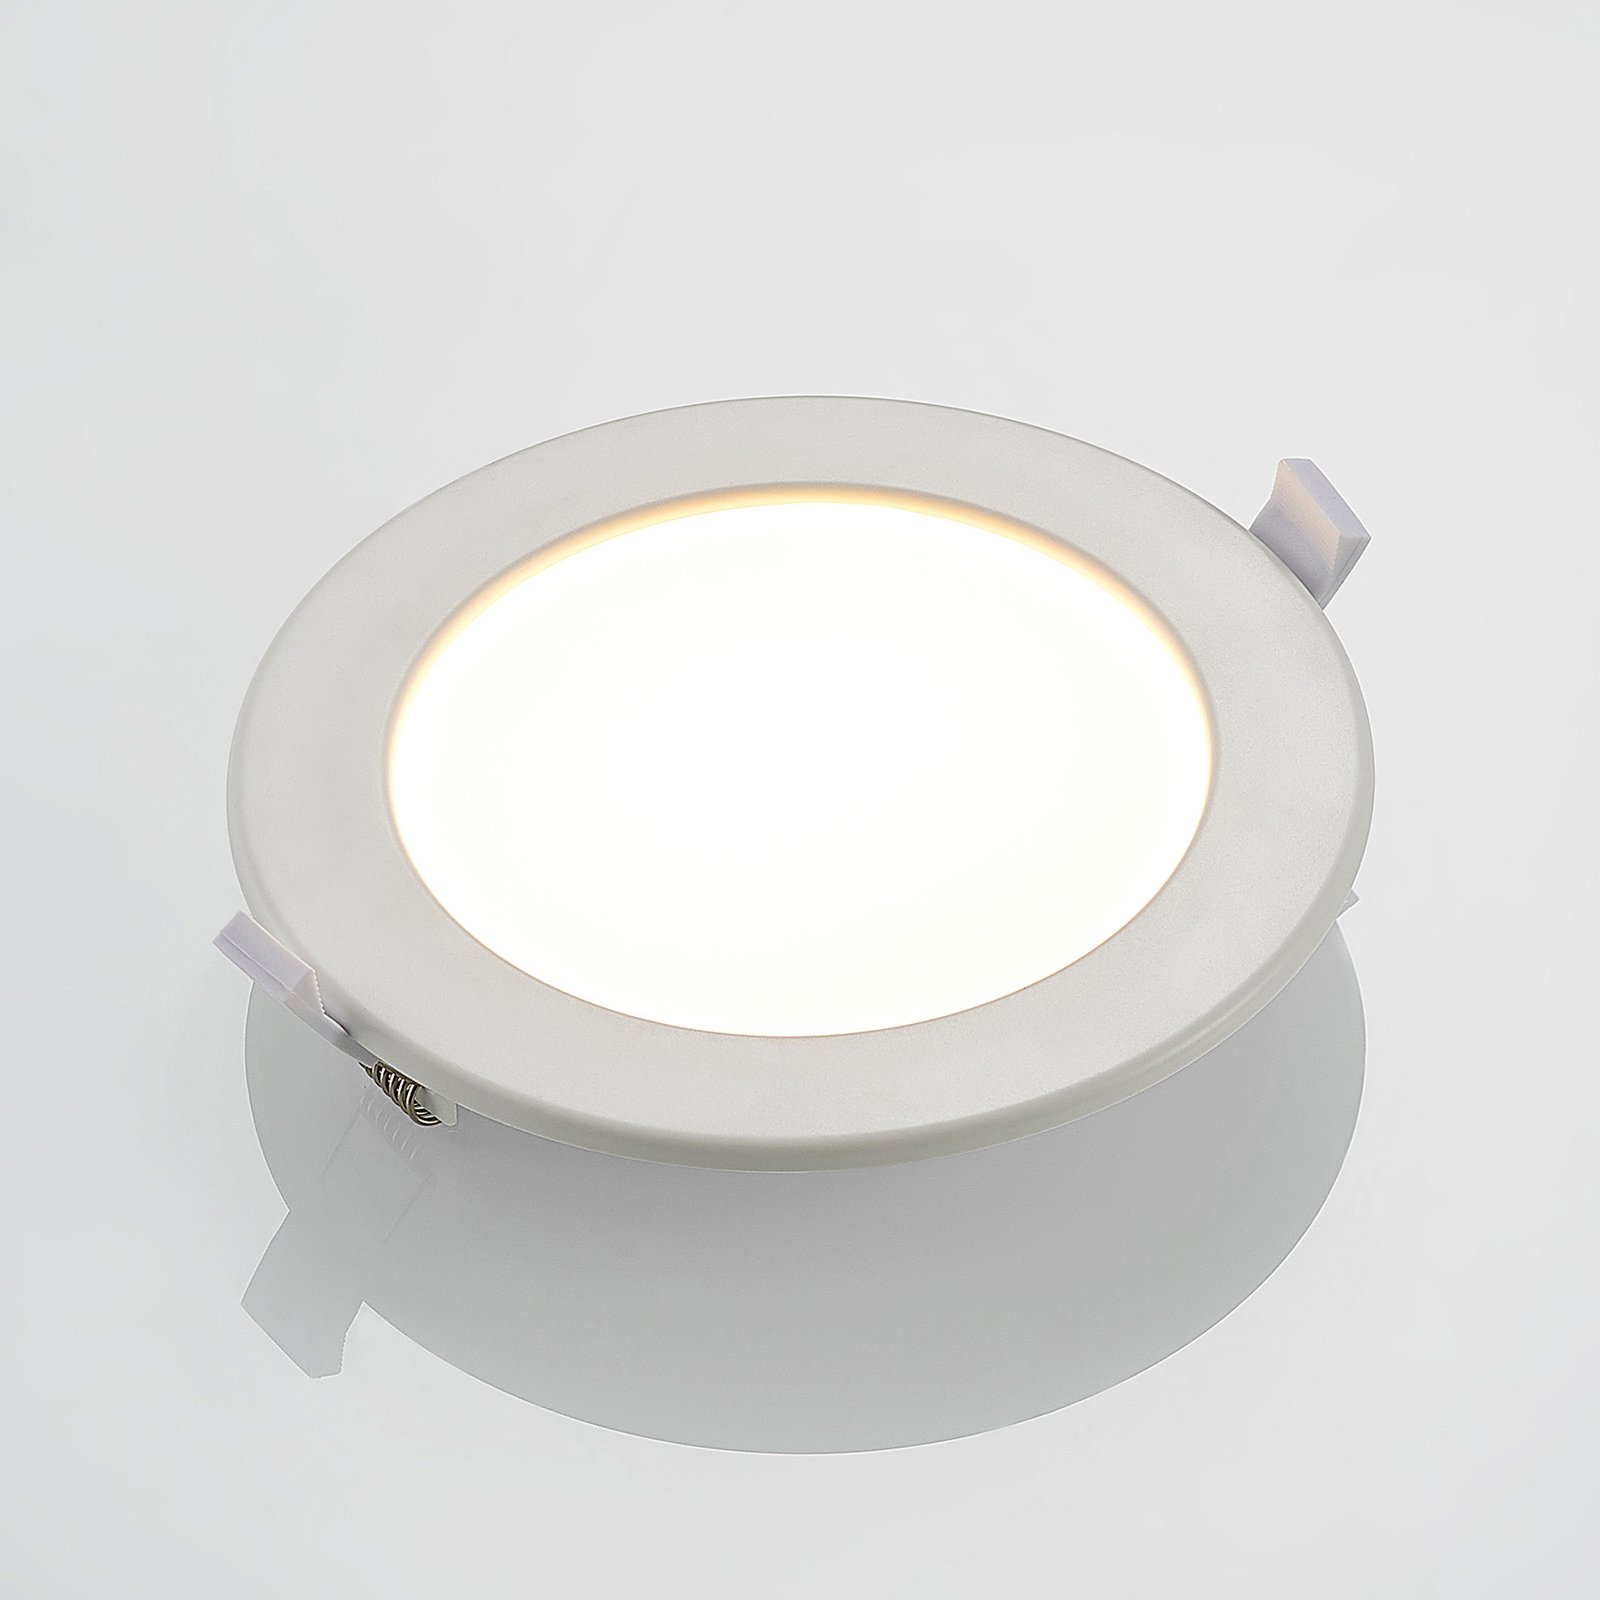 Prios LED recessed light Cadance, white, 17 cm, 10 units, dimmable